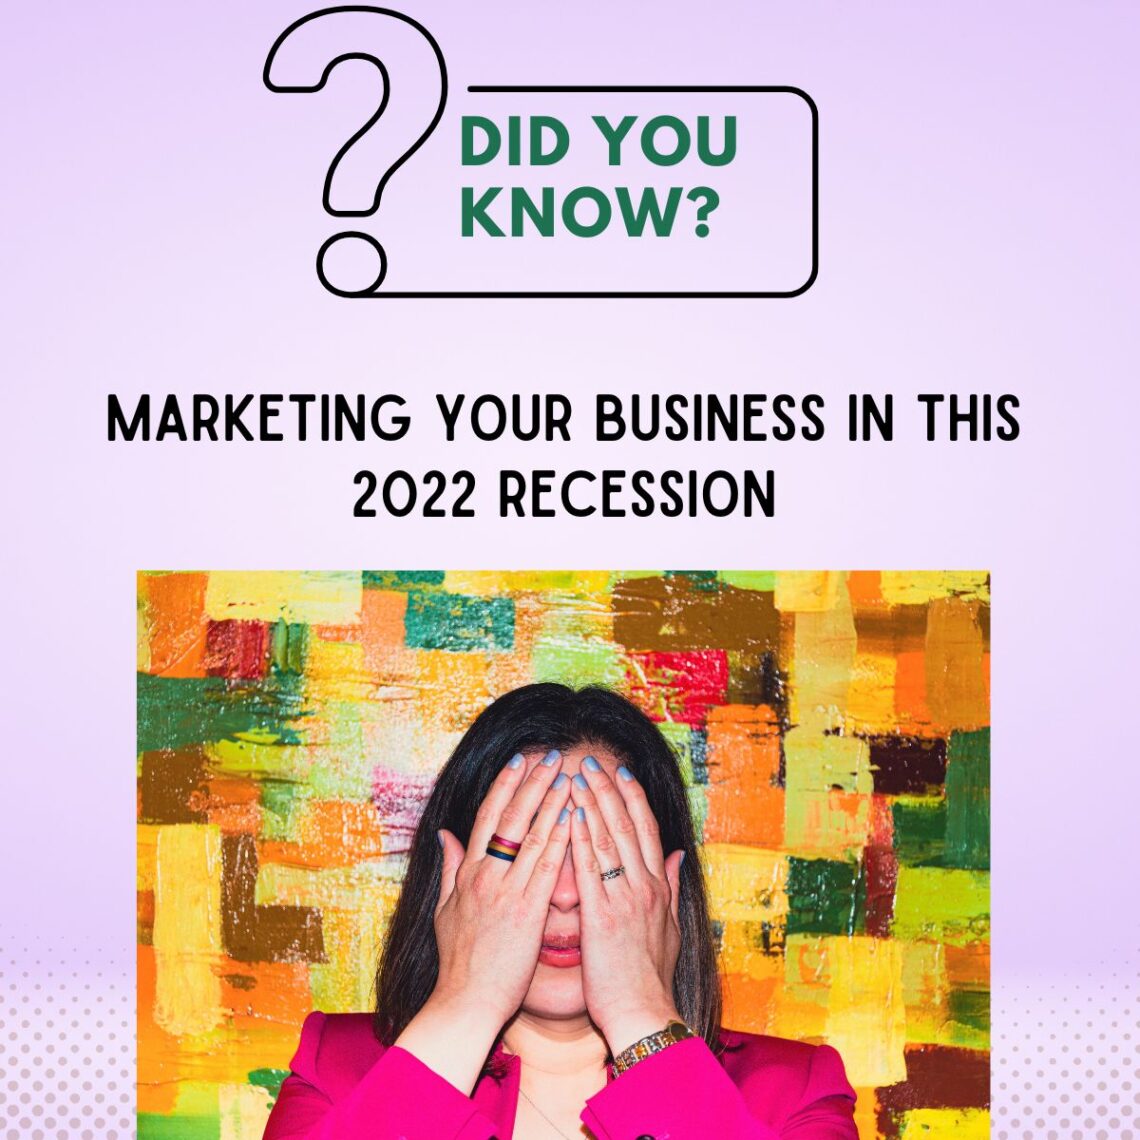 Marketing your business in this 2022 recession